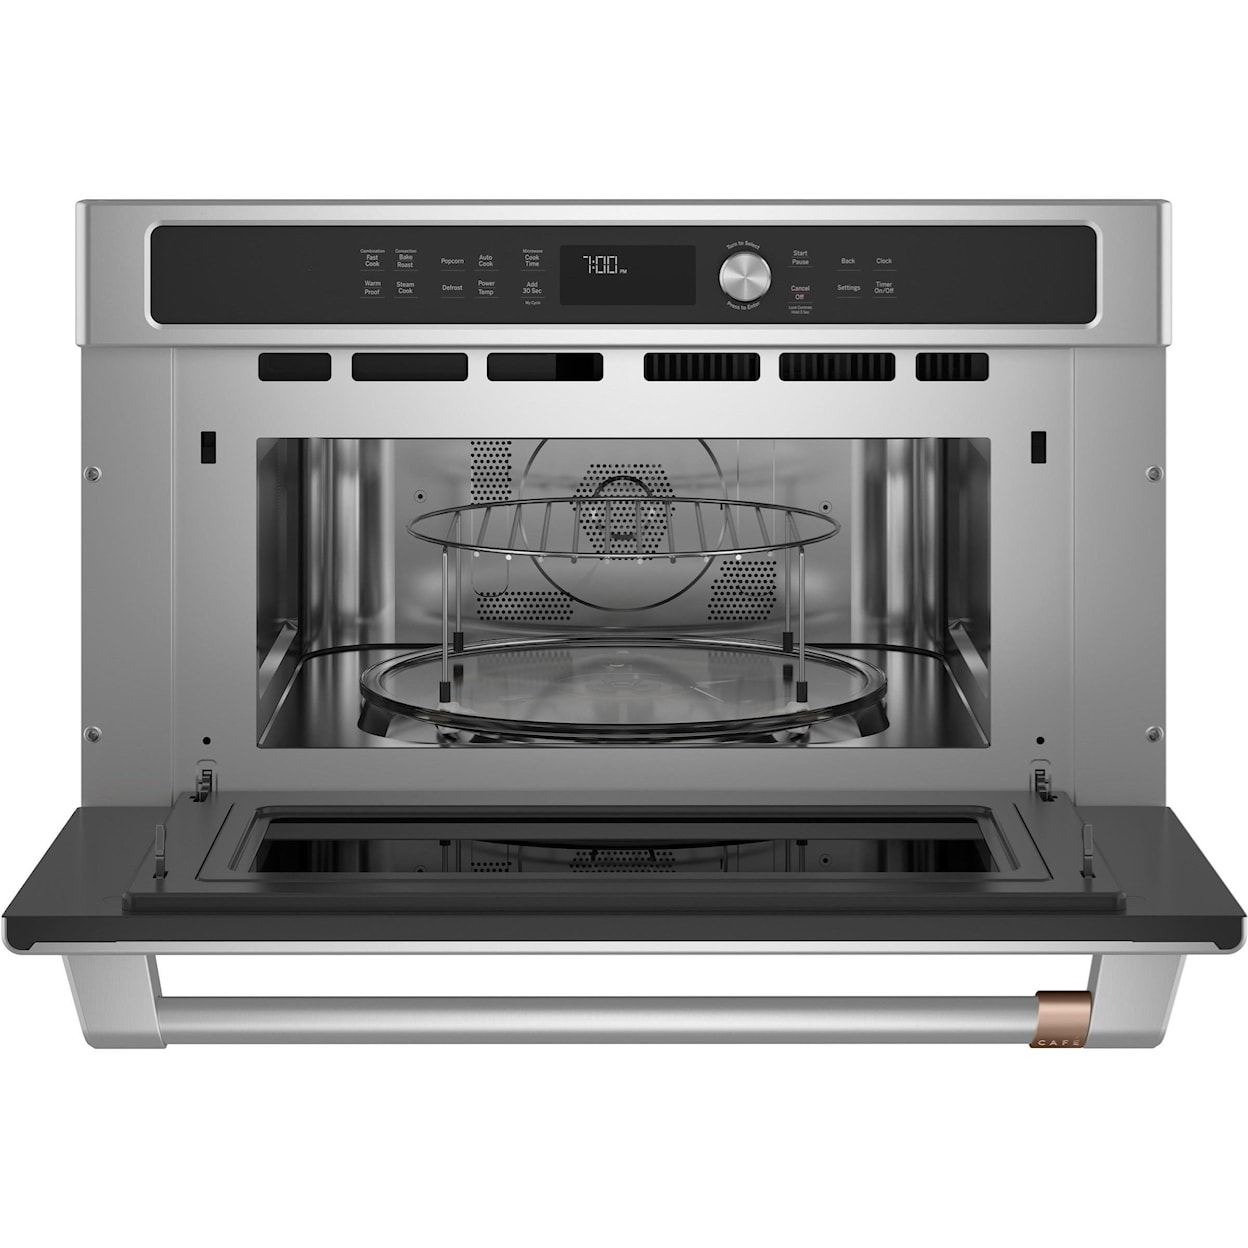 GE Appliances GE Cafe´ Microwave Oven Cafe´™ Built-In Microwave/Convection Oven